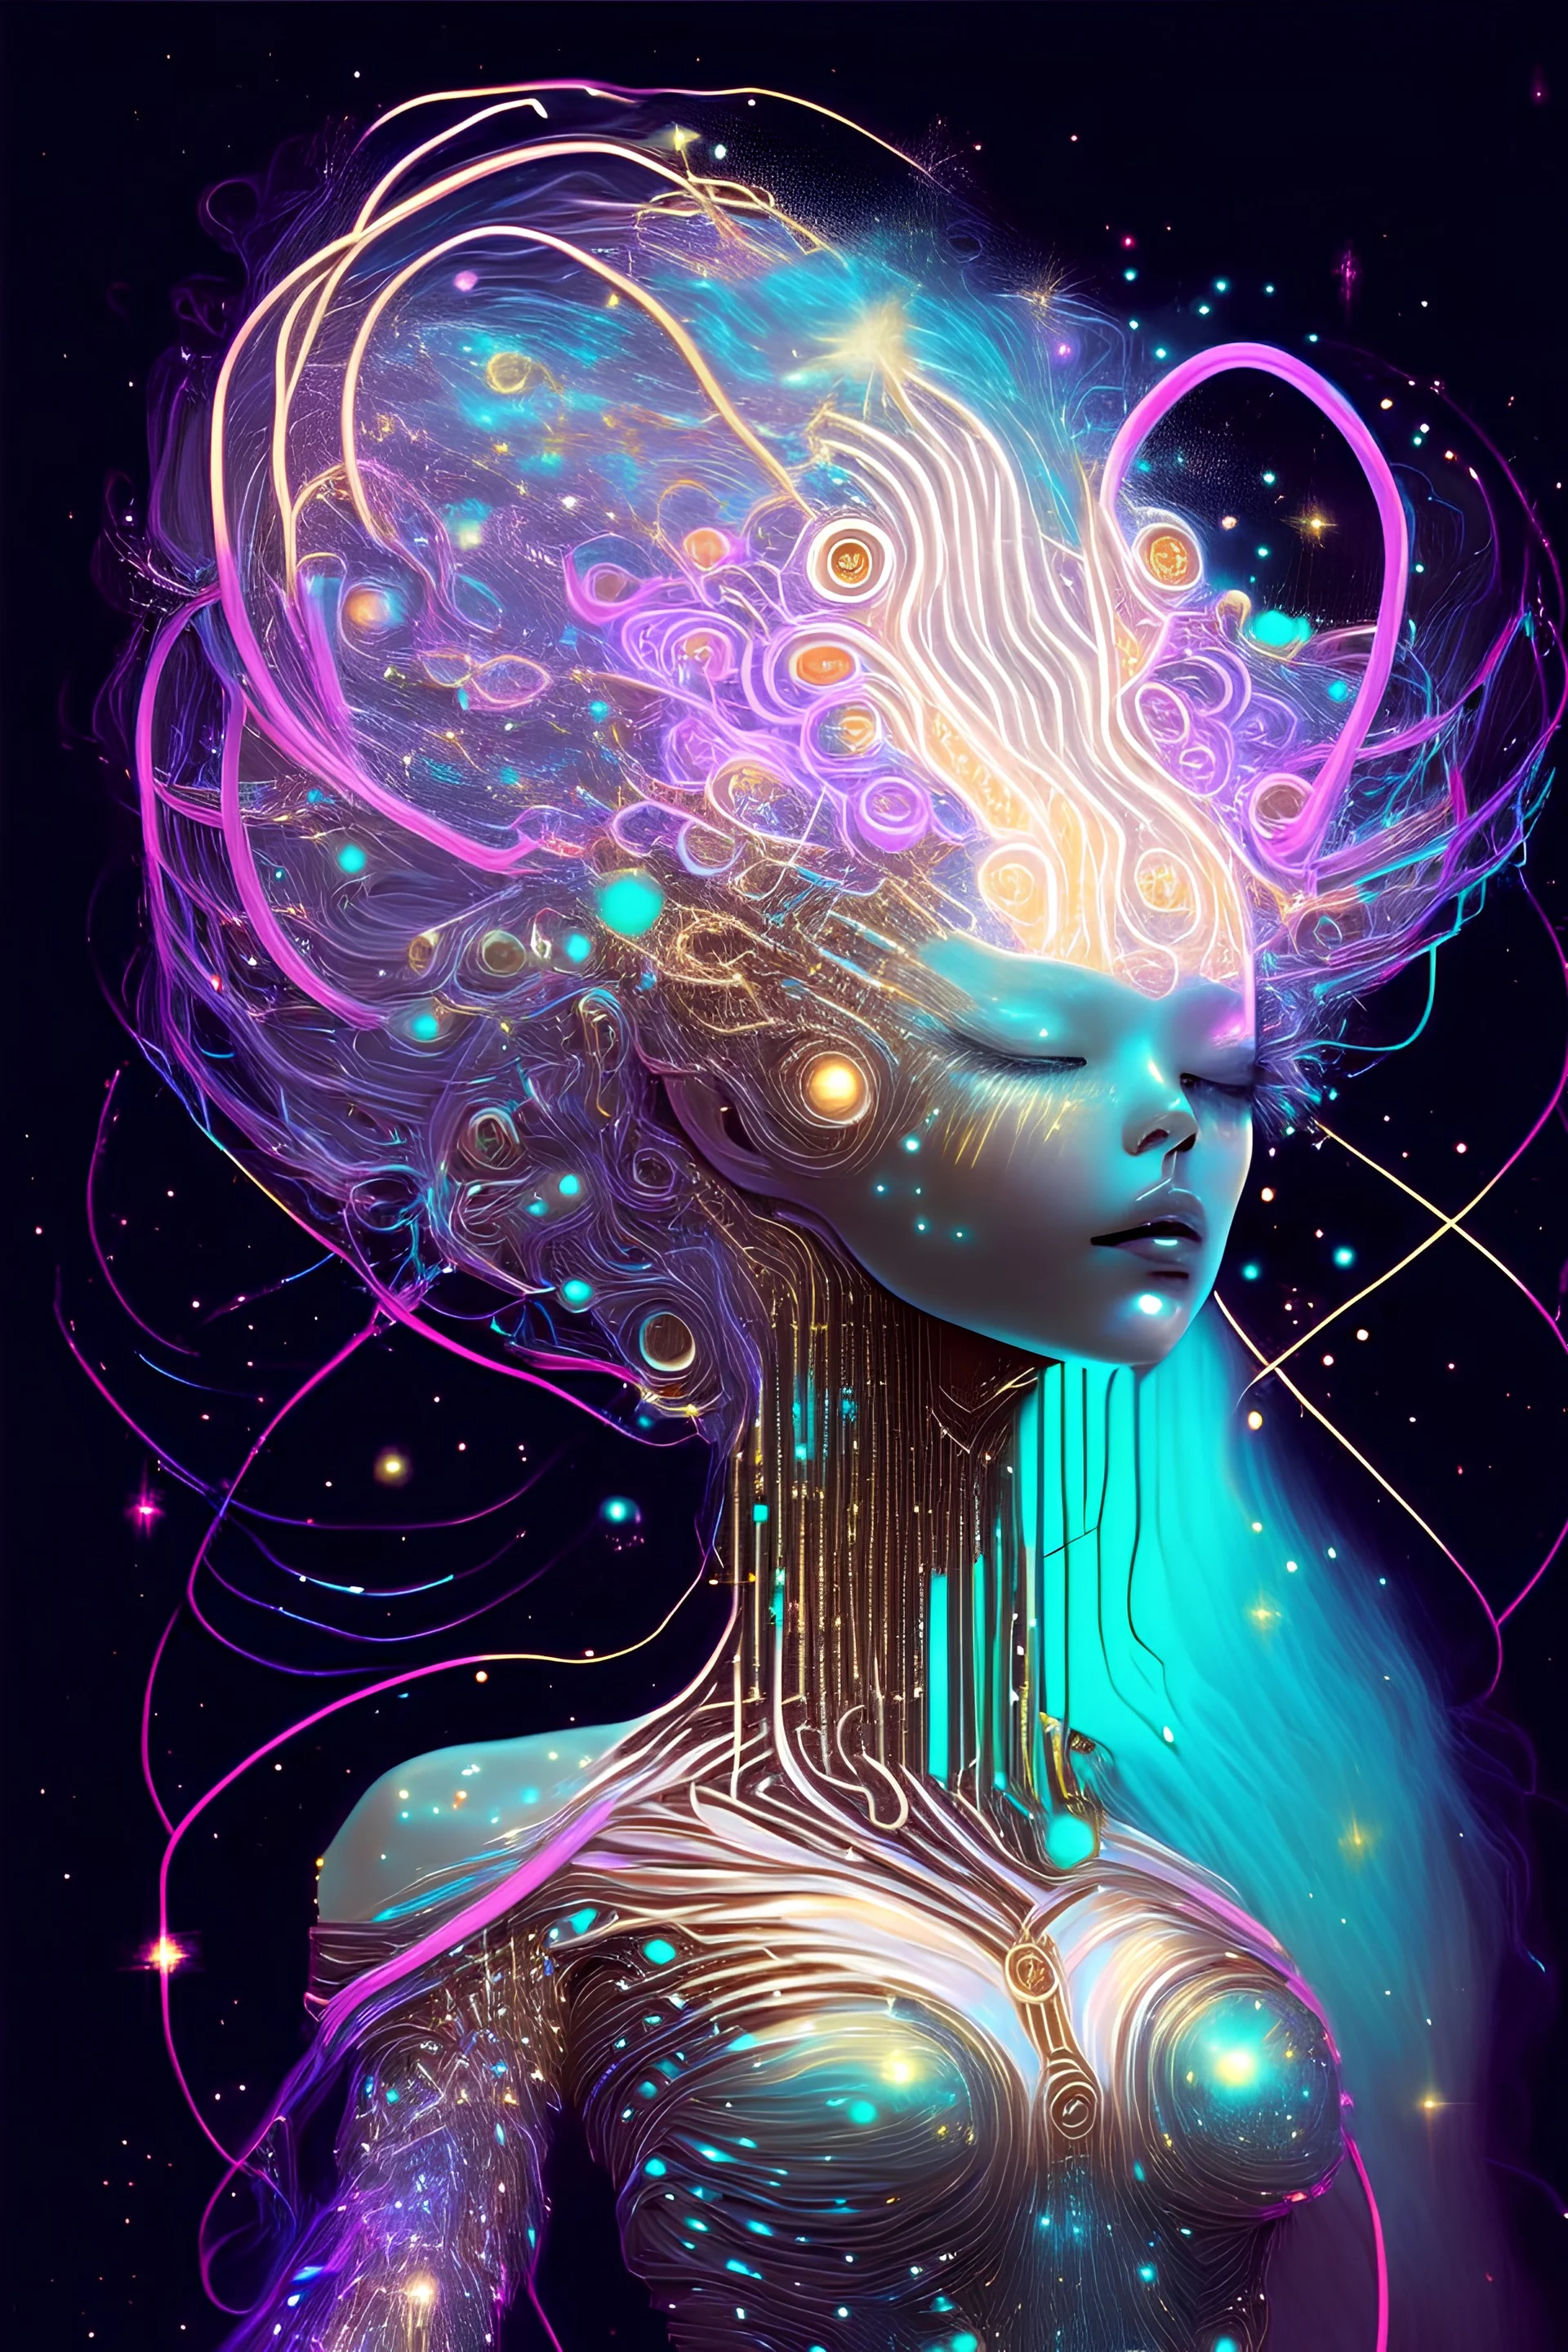 Goddess of music with holographic images, stars, planets, crescent moon, musical notes, musical notation, particles, all floating around her head and body): iridescent turquoise metal, pink and gold optic fibre hair, robot, electric, neon, nebula, light shards, iridescent galaxy metal, glowing tendrils and threads for hair, electric wires, hair swirling and billowing, lighting effects, neon blue synth wave patterns, pearlescent, digital background, shiny